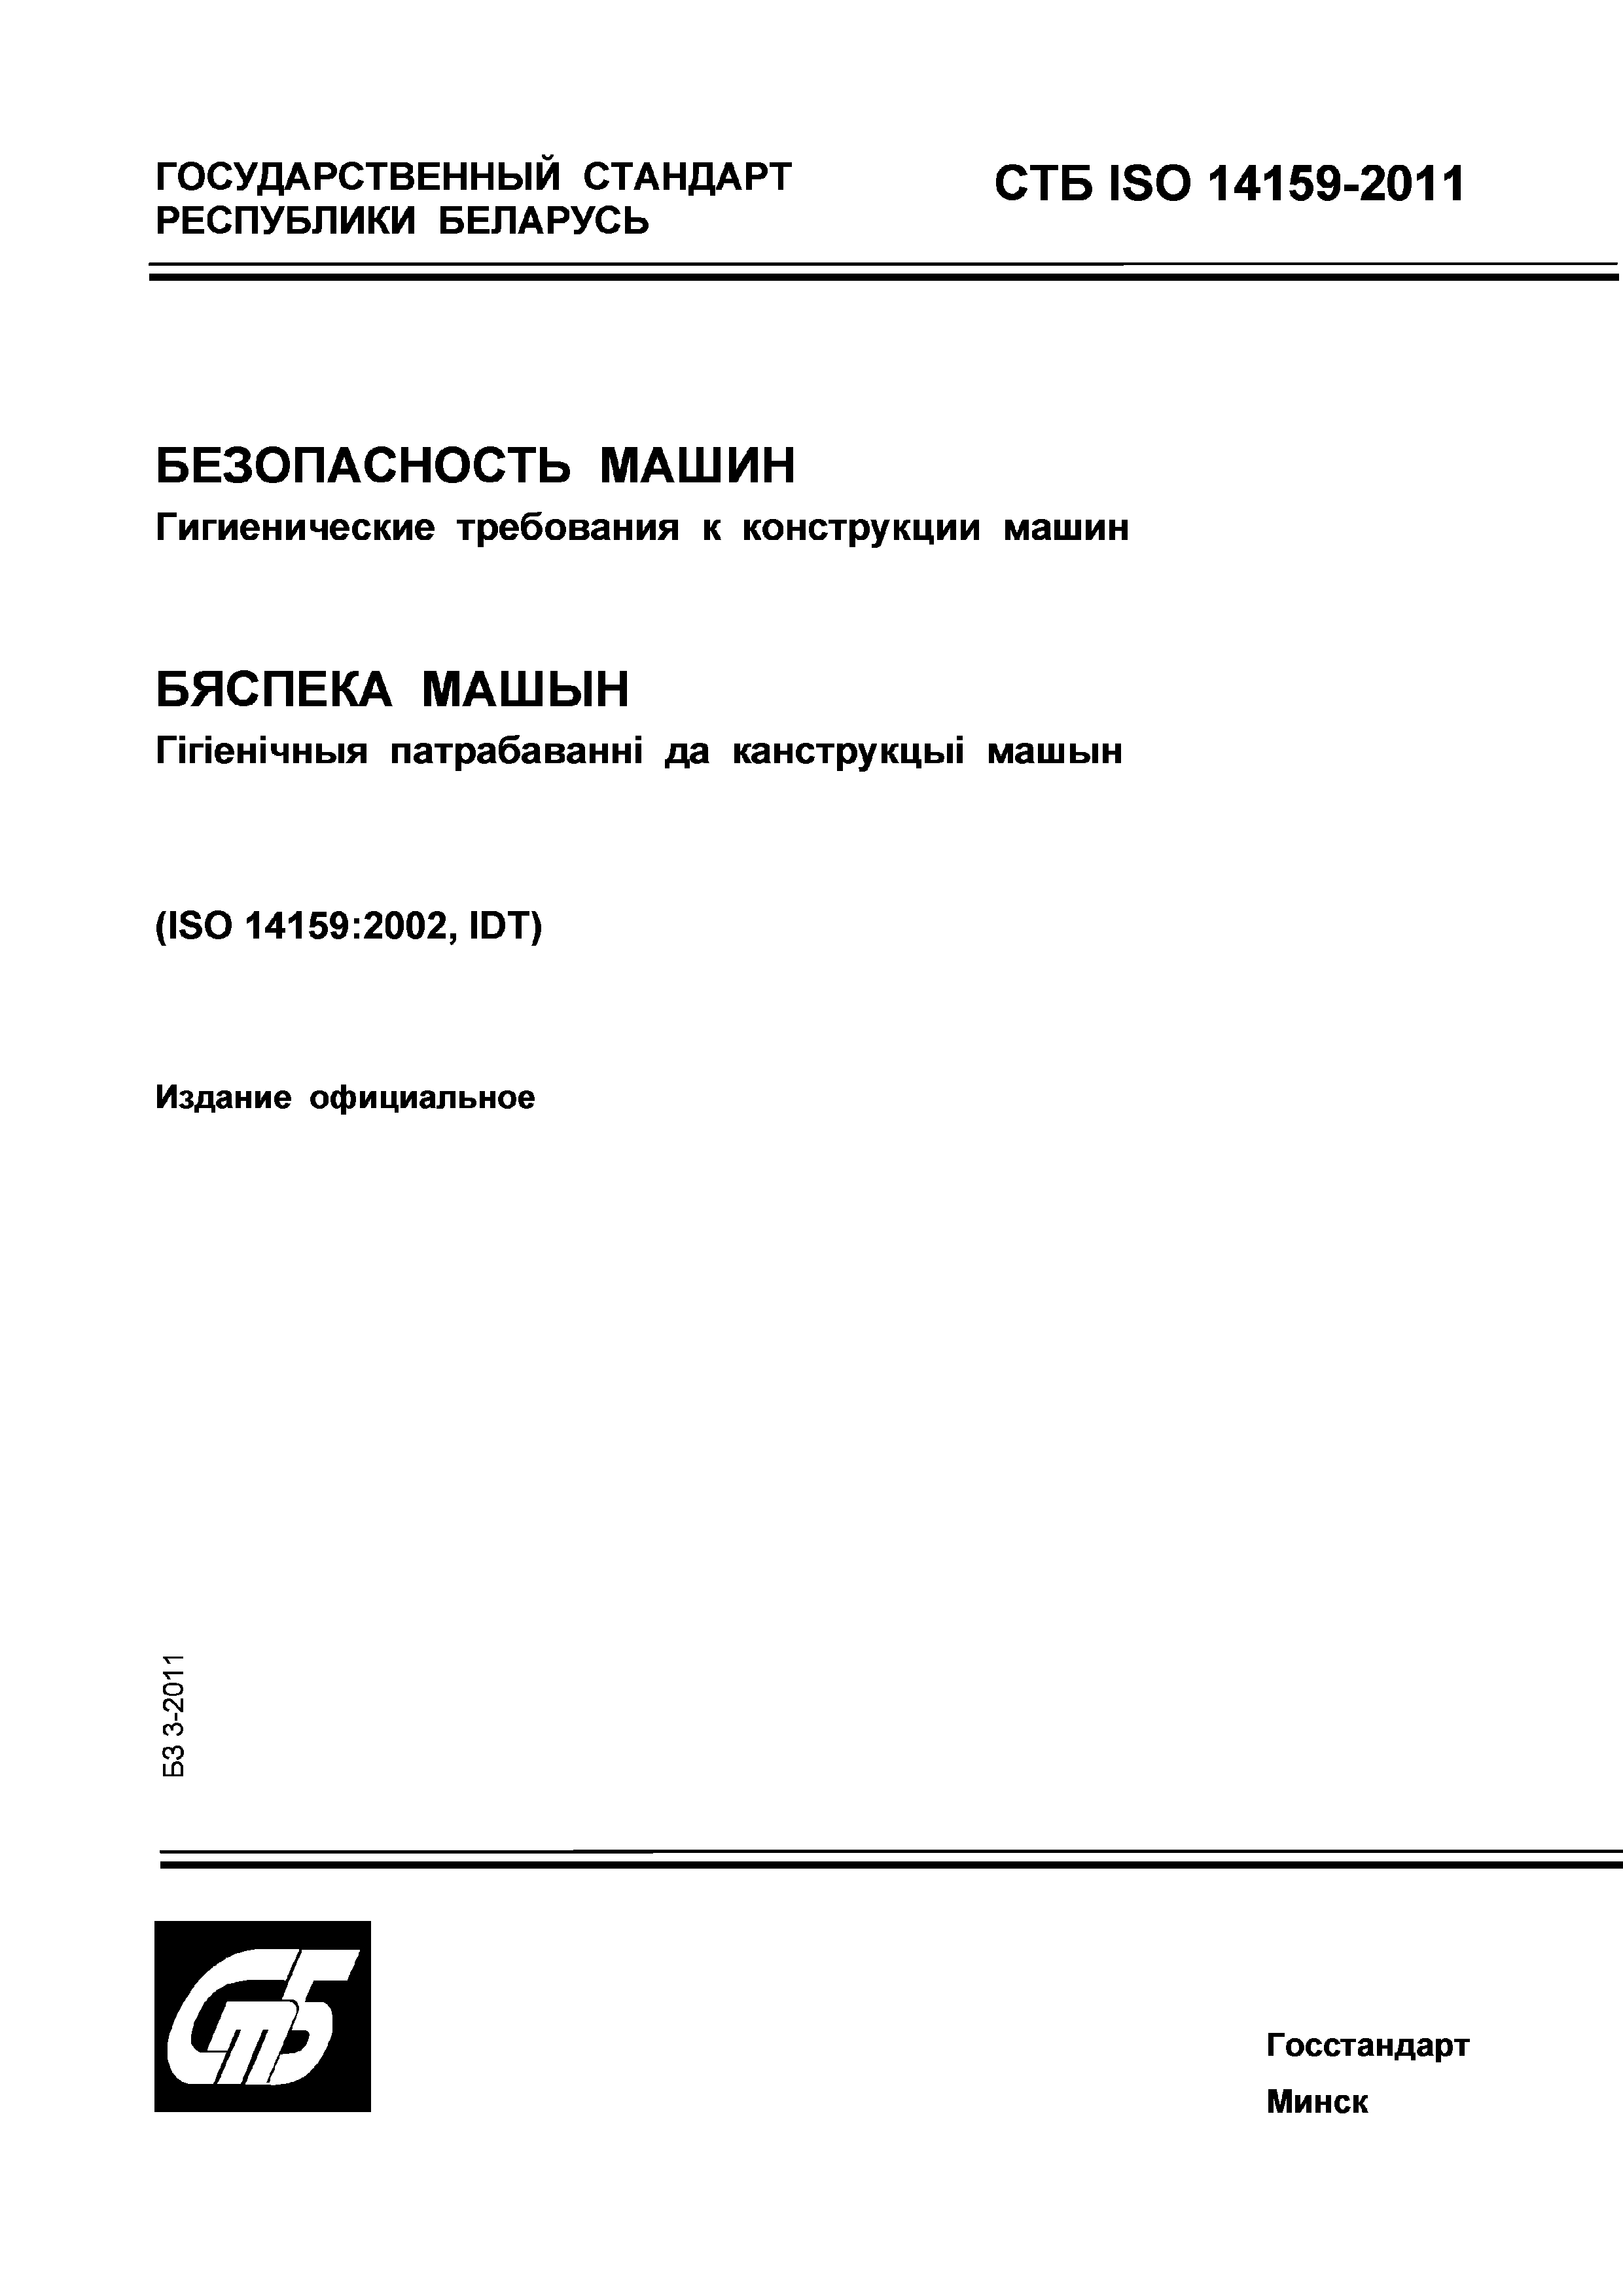 СТБ ISO 14159-2011